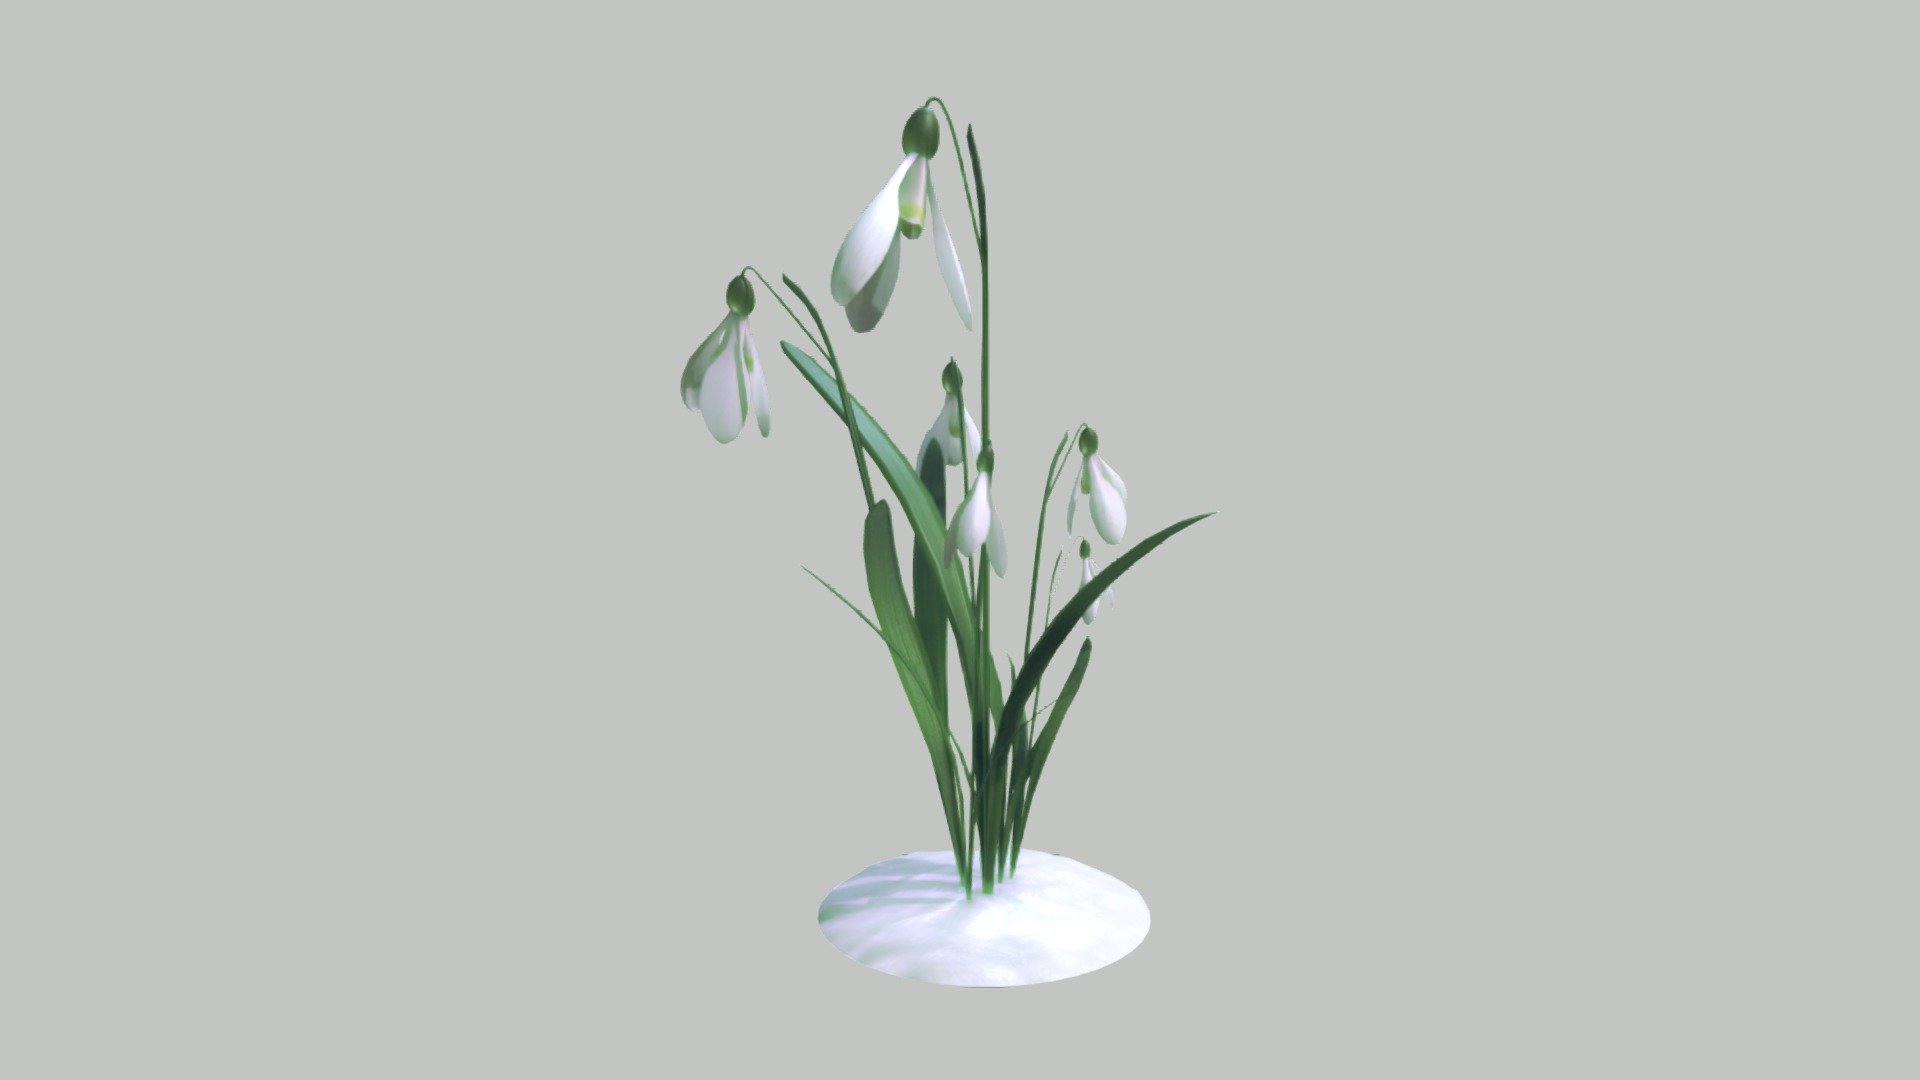 A small and beautiful winter flower galanthus. Made in 3ds Max 3d model